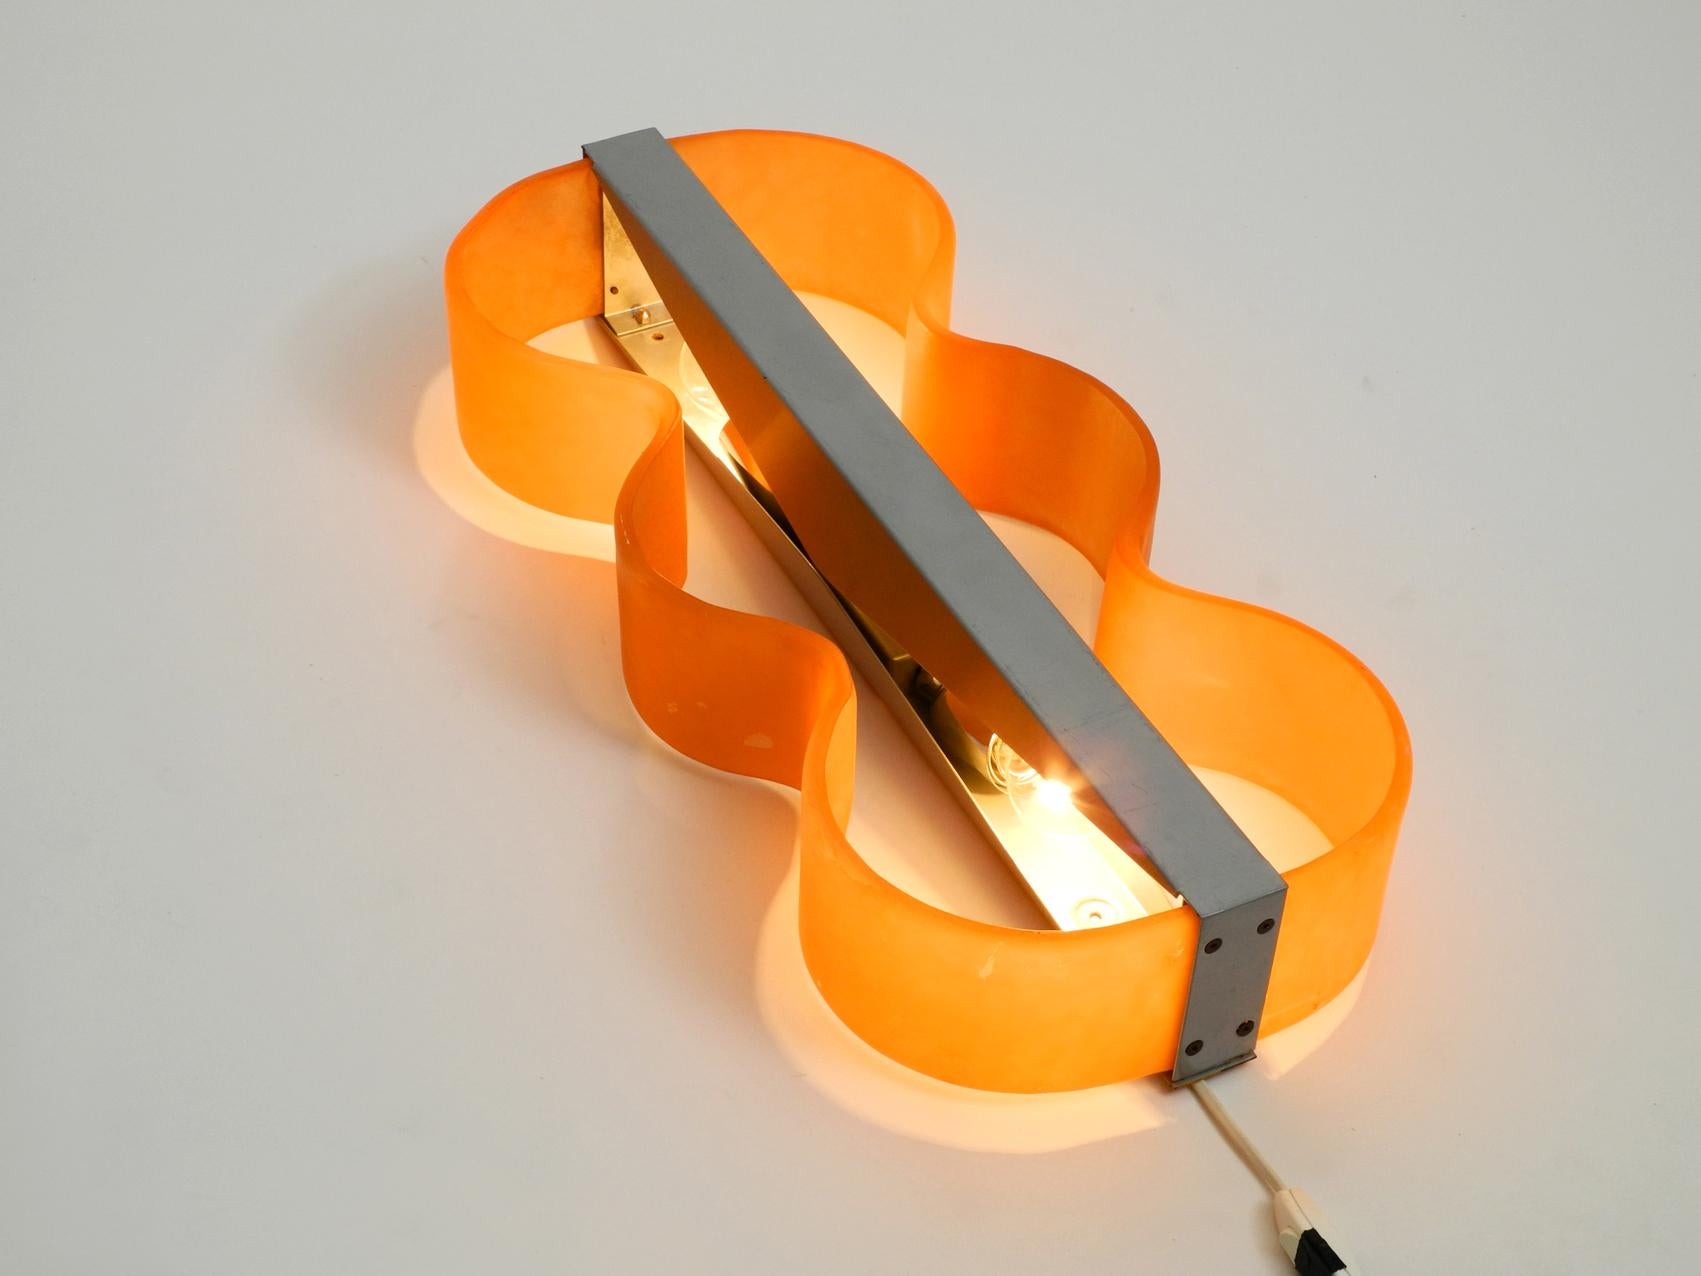 Large heavy glass wall lamp from the 1980s.
Very nice organic design. Probably from an italian production. Creates a very nice pleasant light.
Orange glass in one piece and very solid and heavy.
No cracks or chipping on the glass shade.
But some